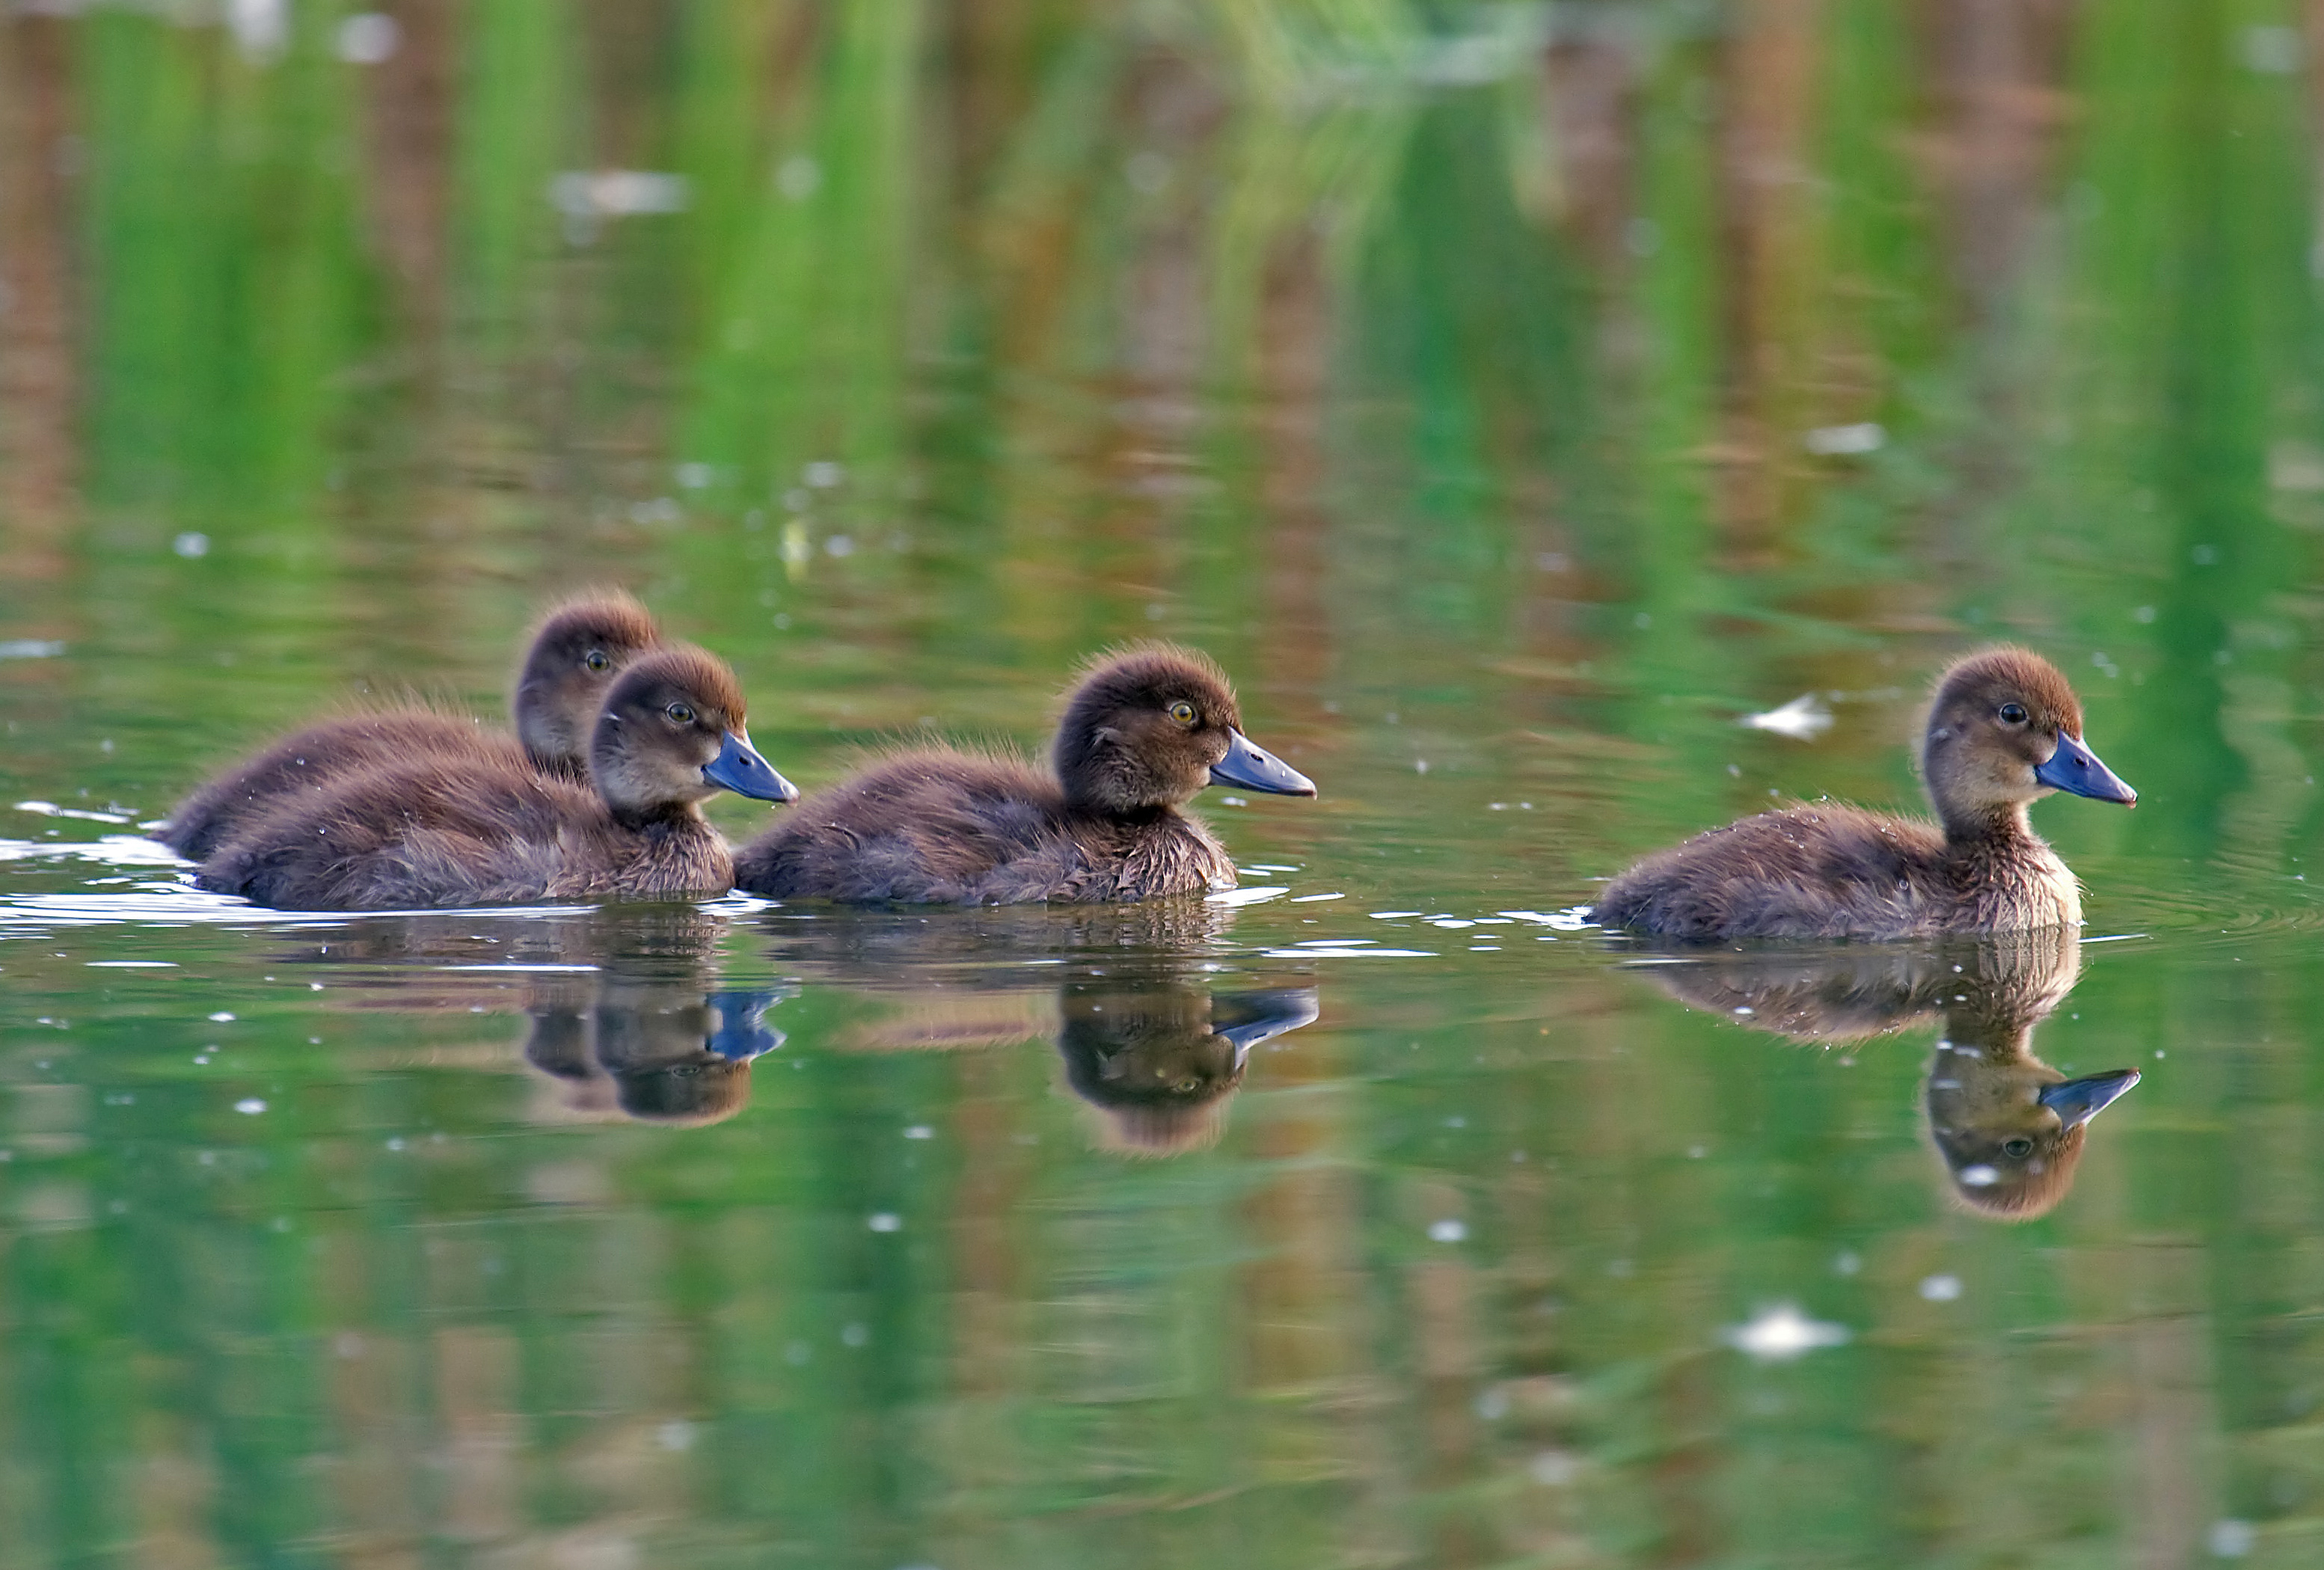 Tufted duck ducklings